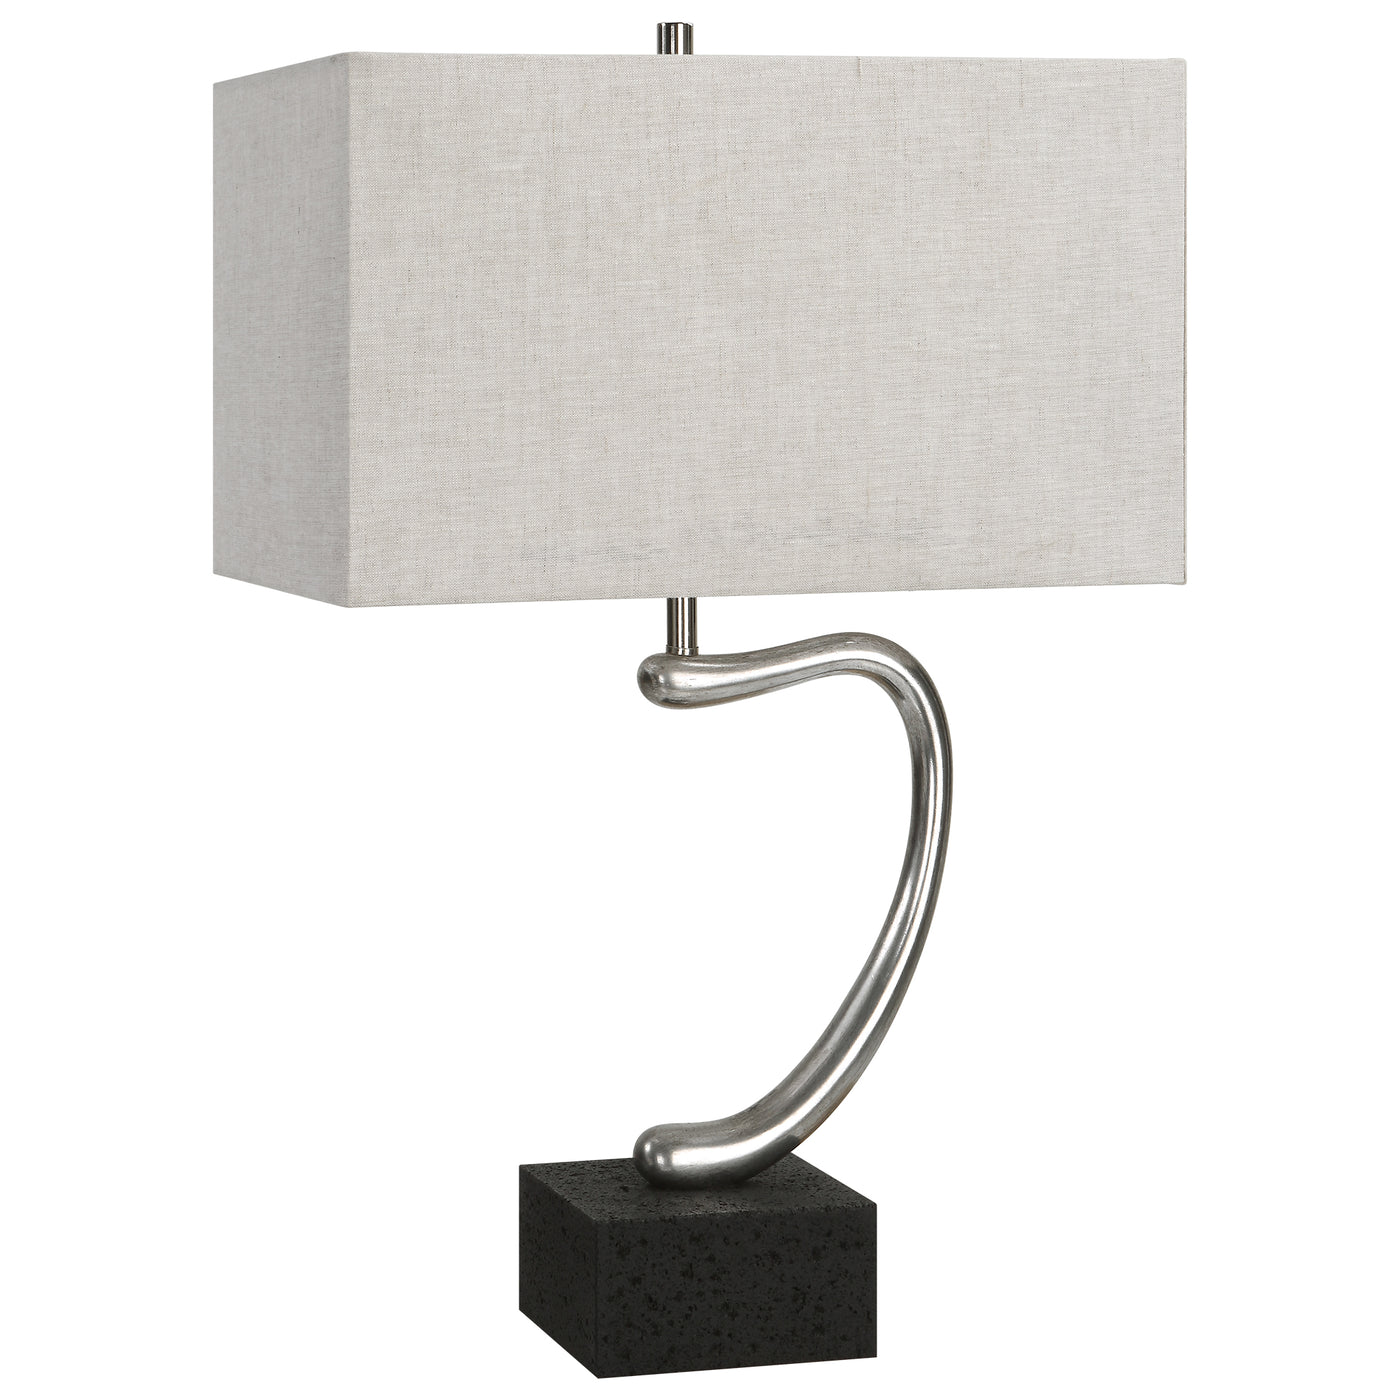 Inspired By Contemporary Art, This Table Lamp Features An Abstract Sculpture Finished In Tarnished Silver, Accented By A G...